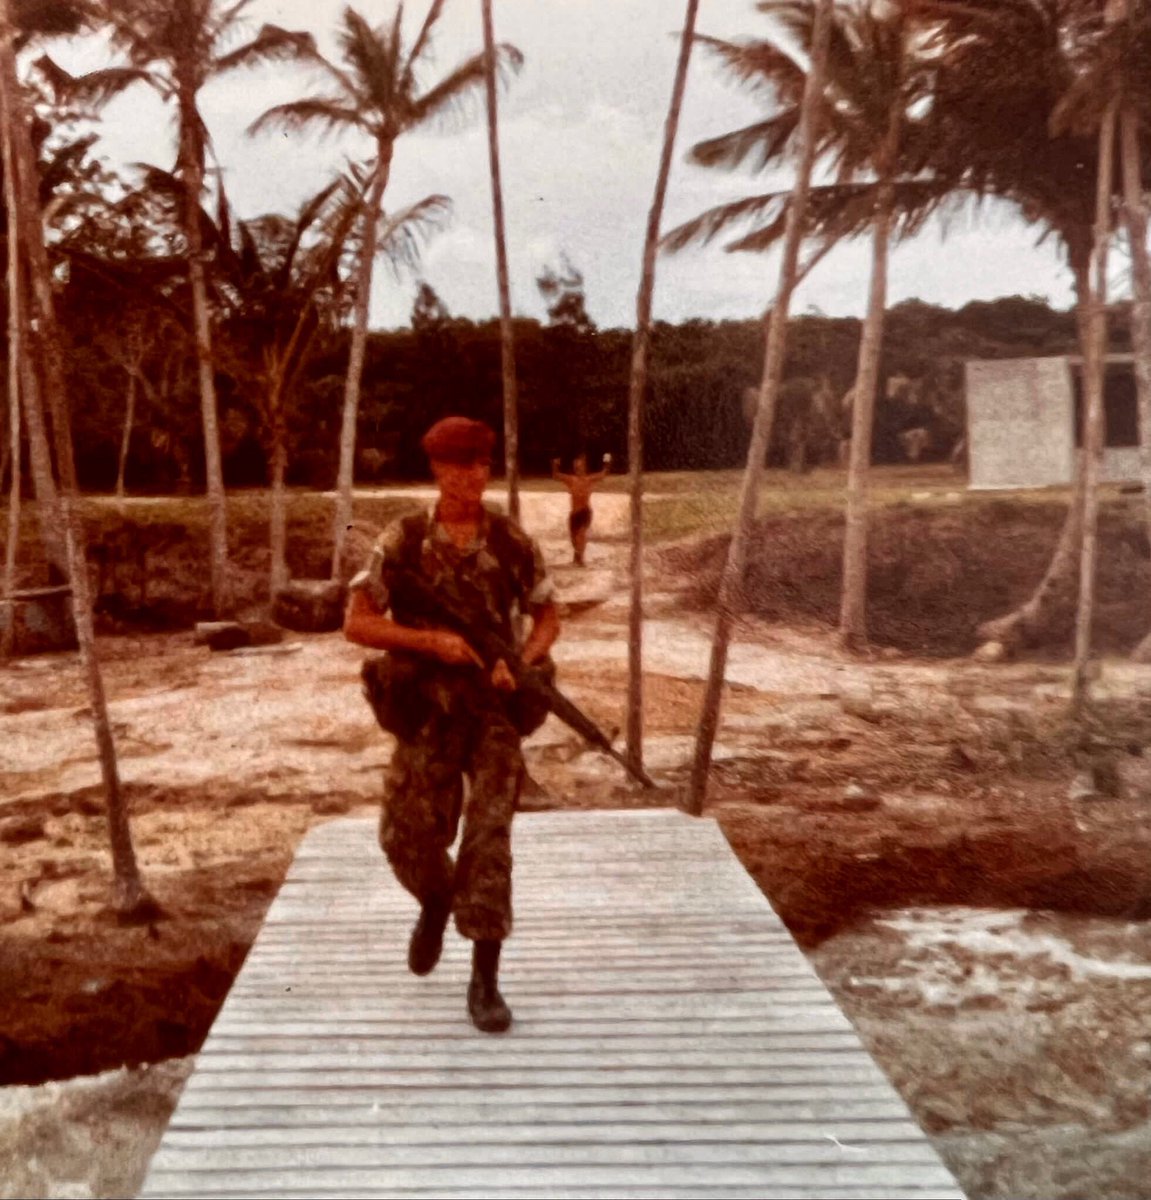 TBT - 1984 Belize
Border Patrol with 3 Para.

A visible presence in the war against narcotics, illegal logging and poaching.

#belize #narcos #3para #parachuteregiment #logging #illegallogging #poaching #saswhodareswins #specialforcesfox #specialforces #sas #realityclubfox